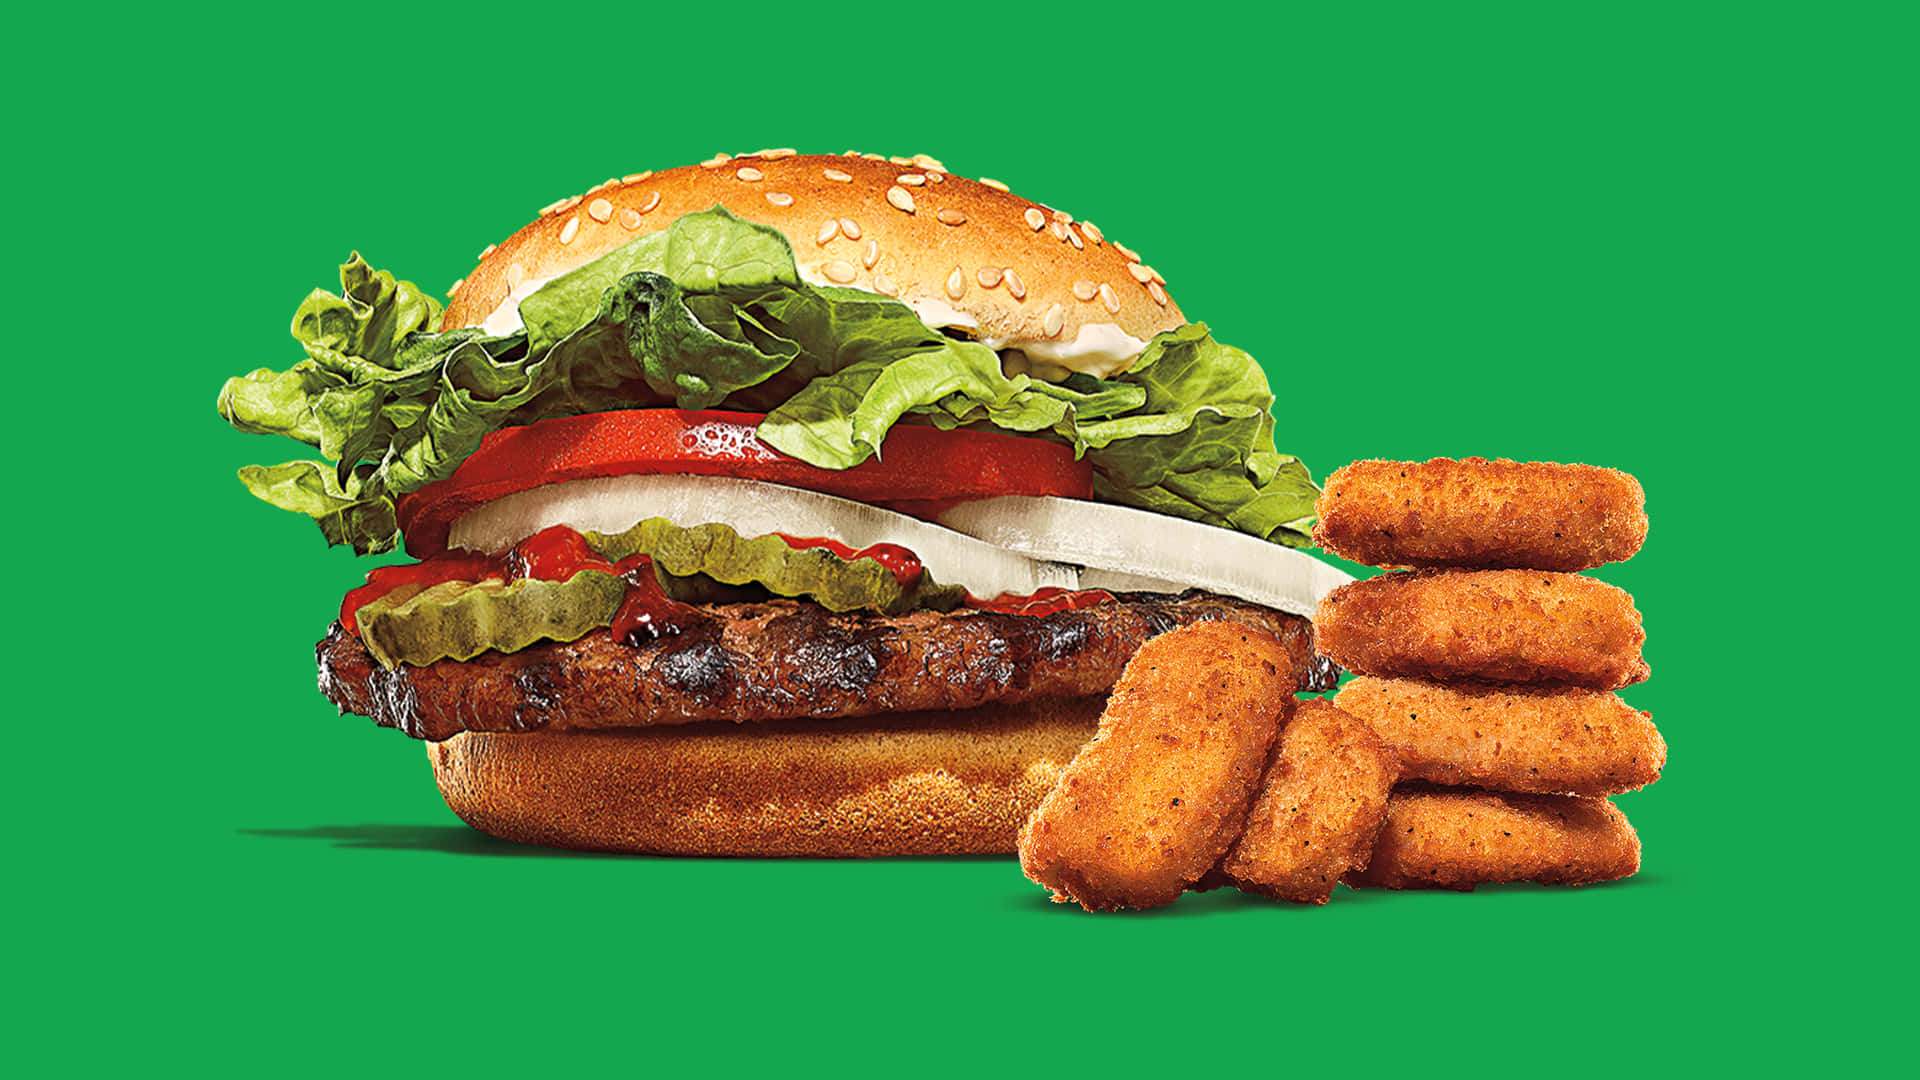 Delicious flame-grilled burgers made to order at Burger King.